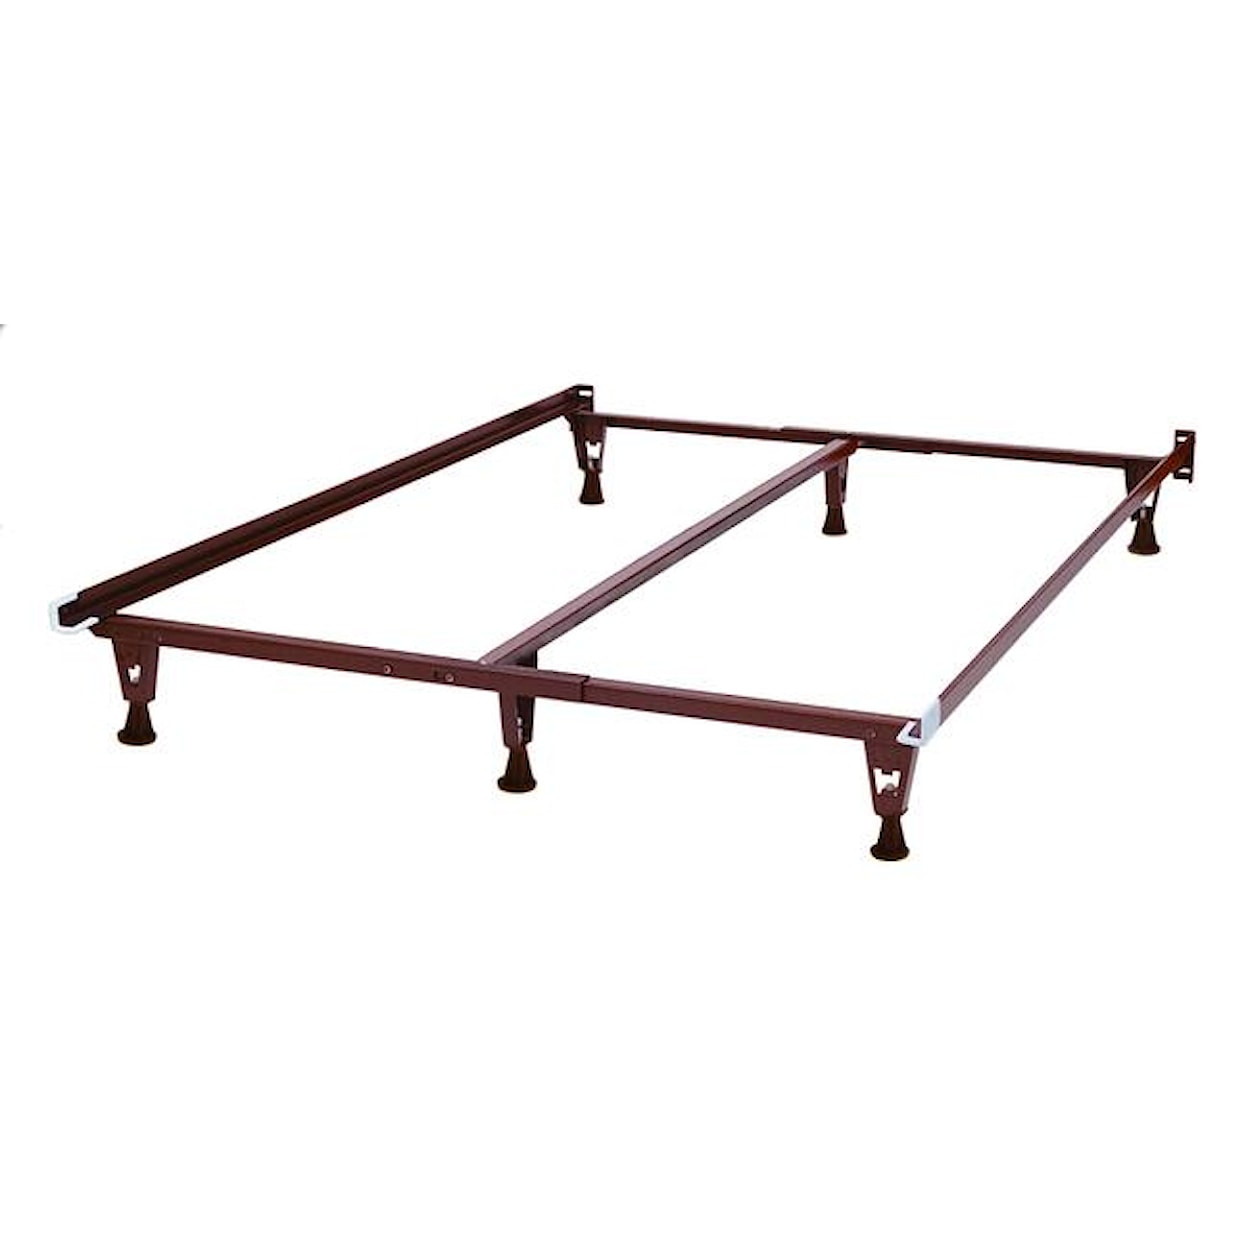 Knickerbocker The Rock Bed Frame Heavy Duty Adjustable Bed Frame with Glides